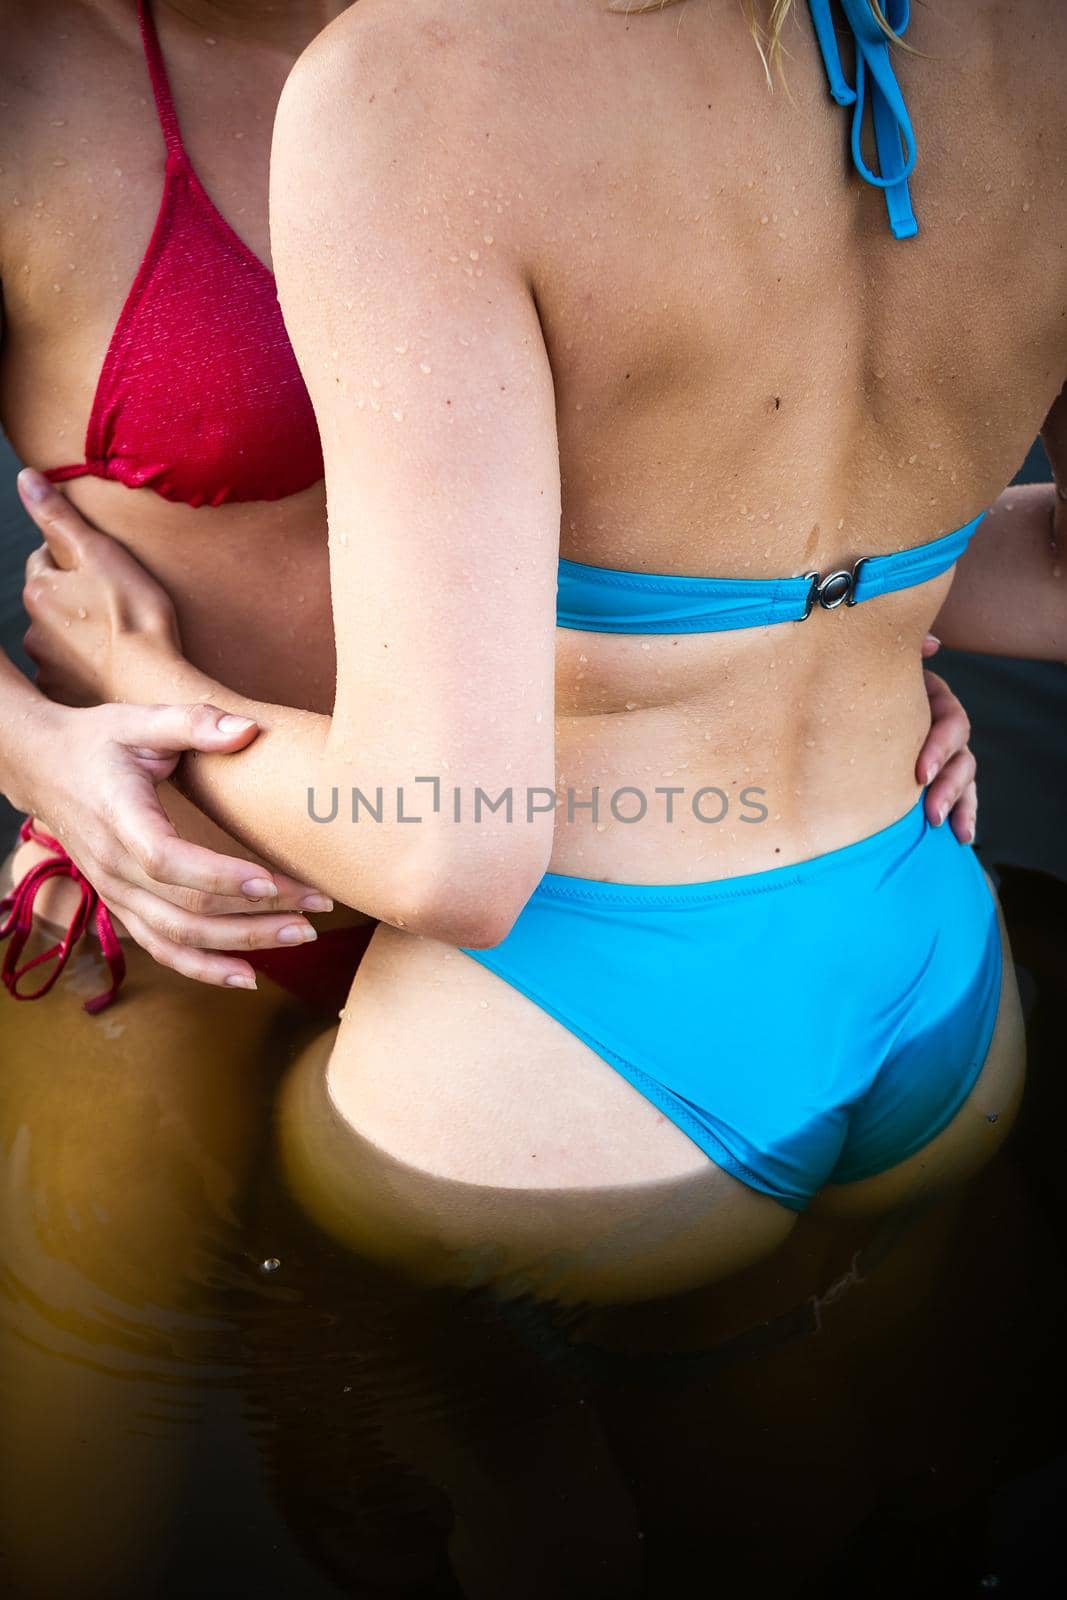 Side view of two young women with beautiful bodies in bikinis. Blue and pink swimsuit in the water.